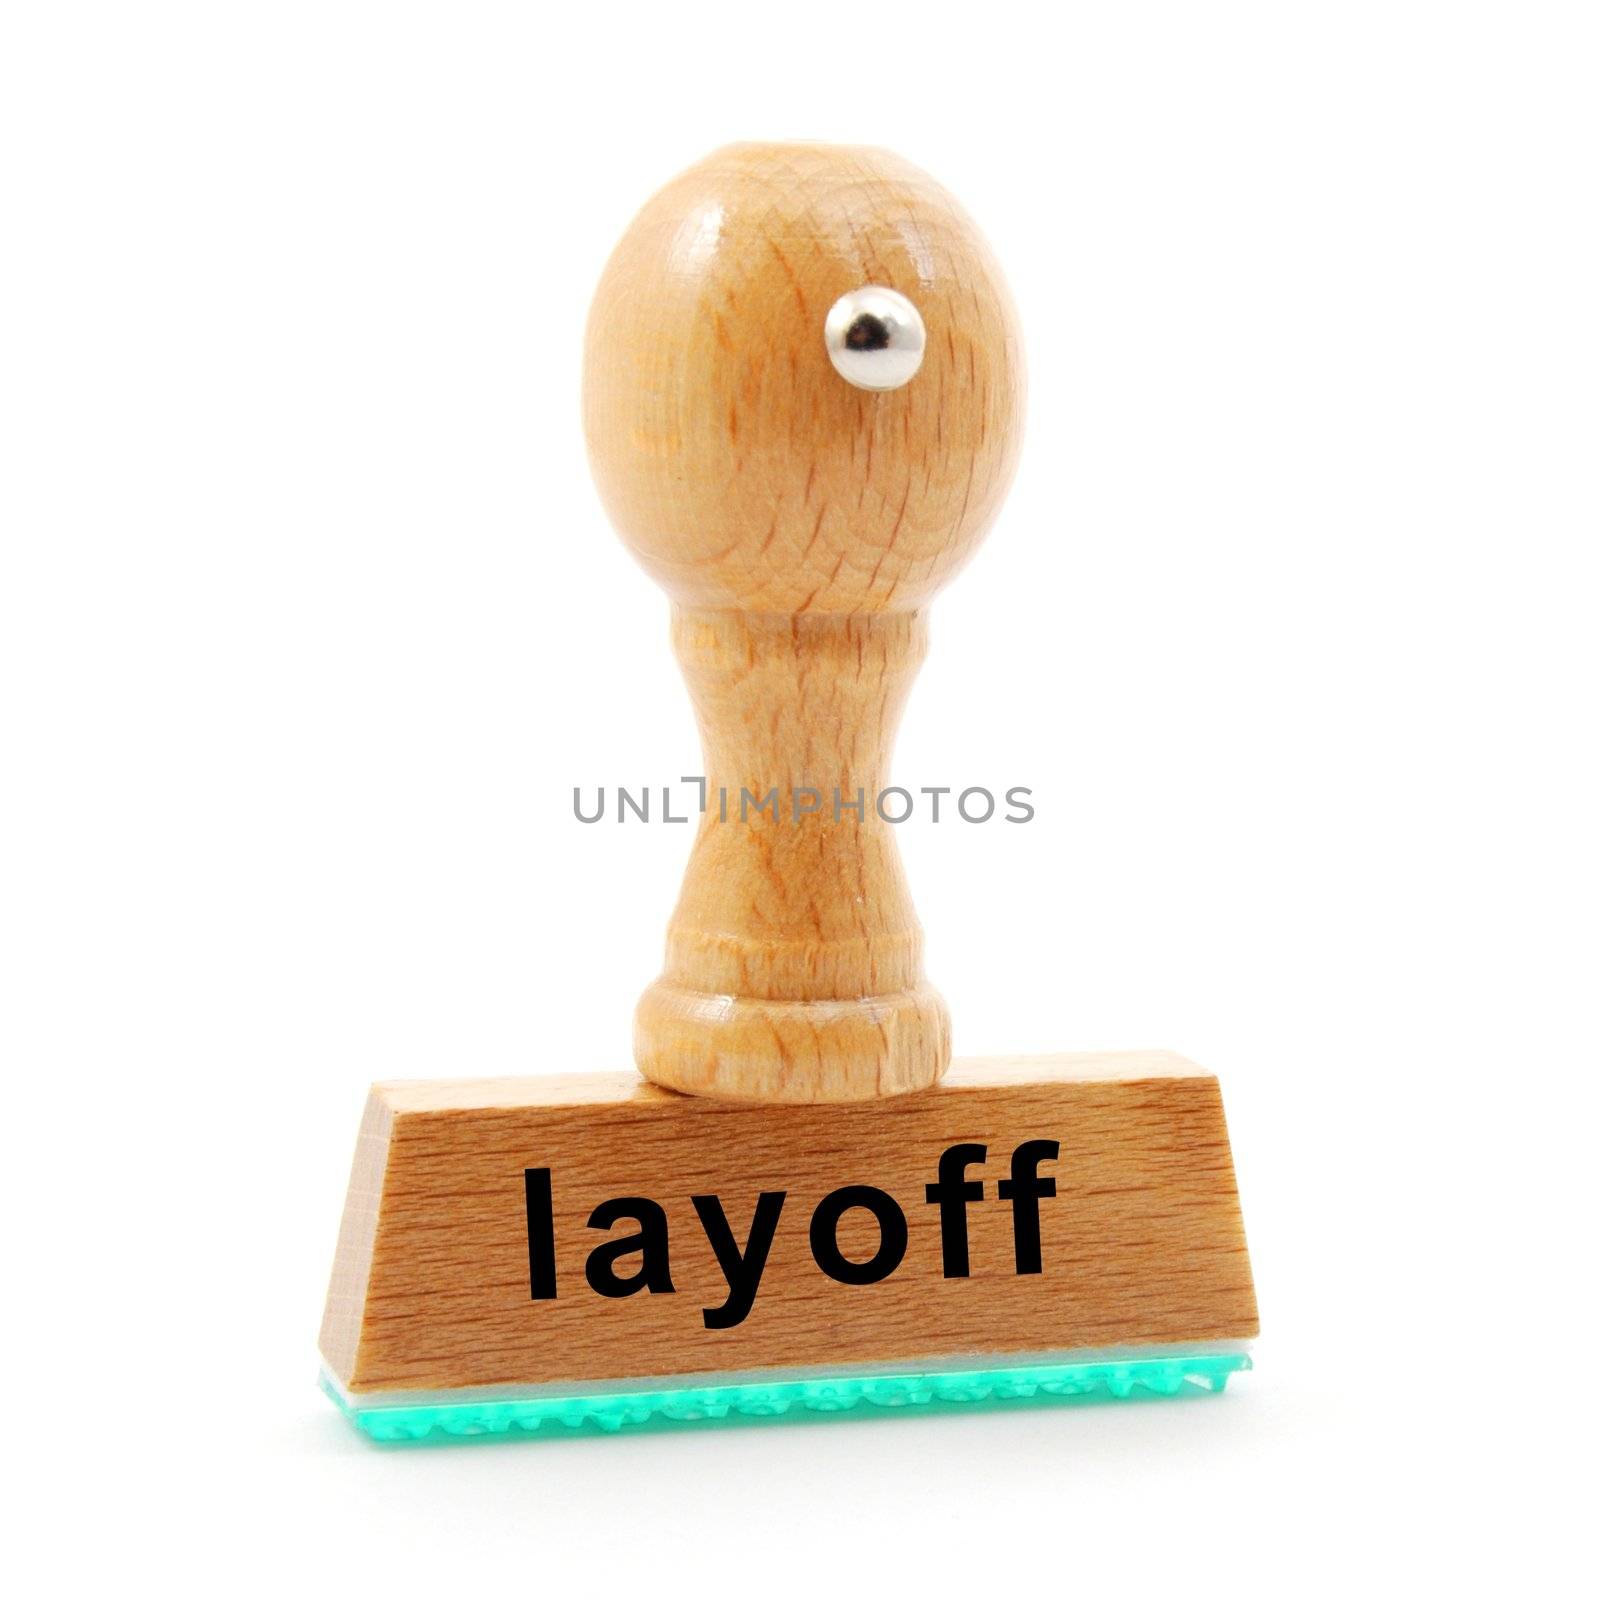 layoff stamp in business office showing unemployment concept